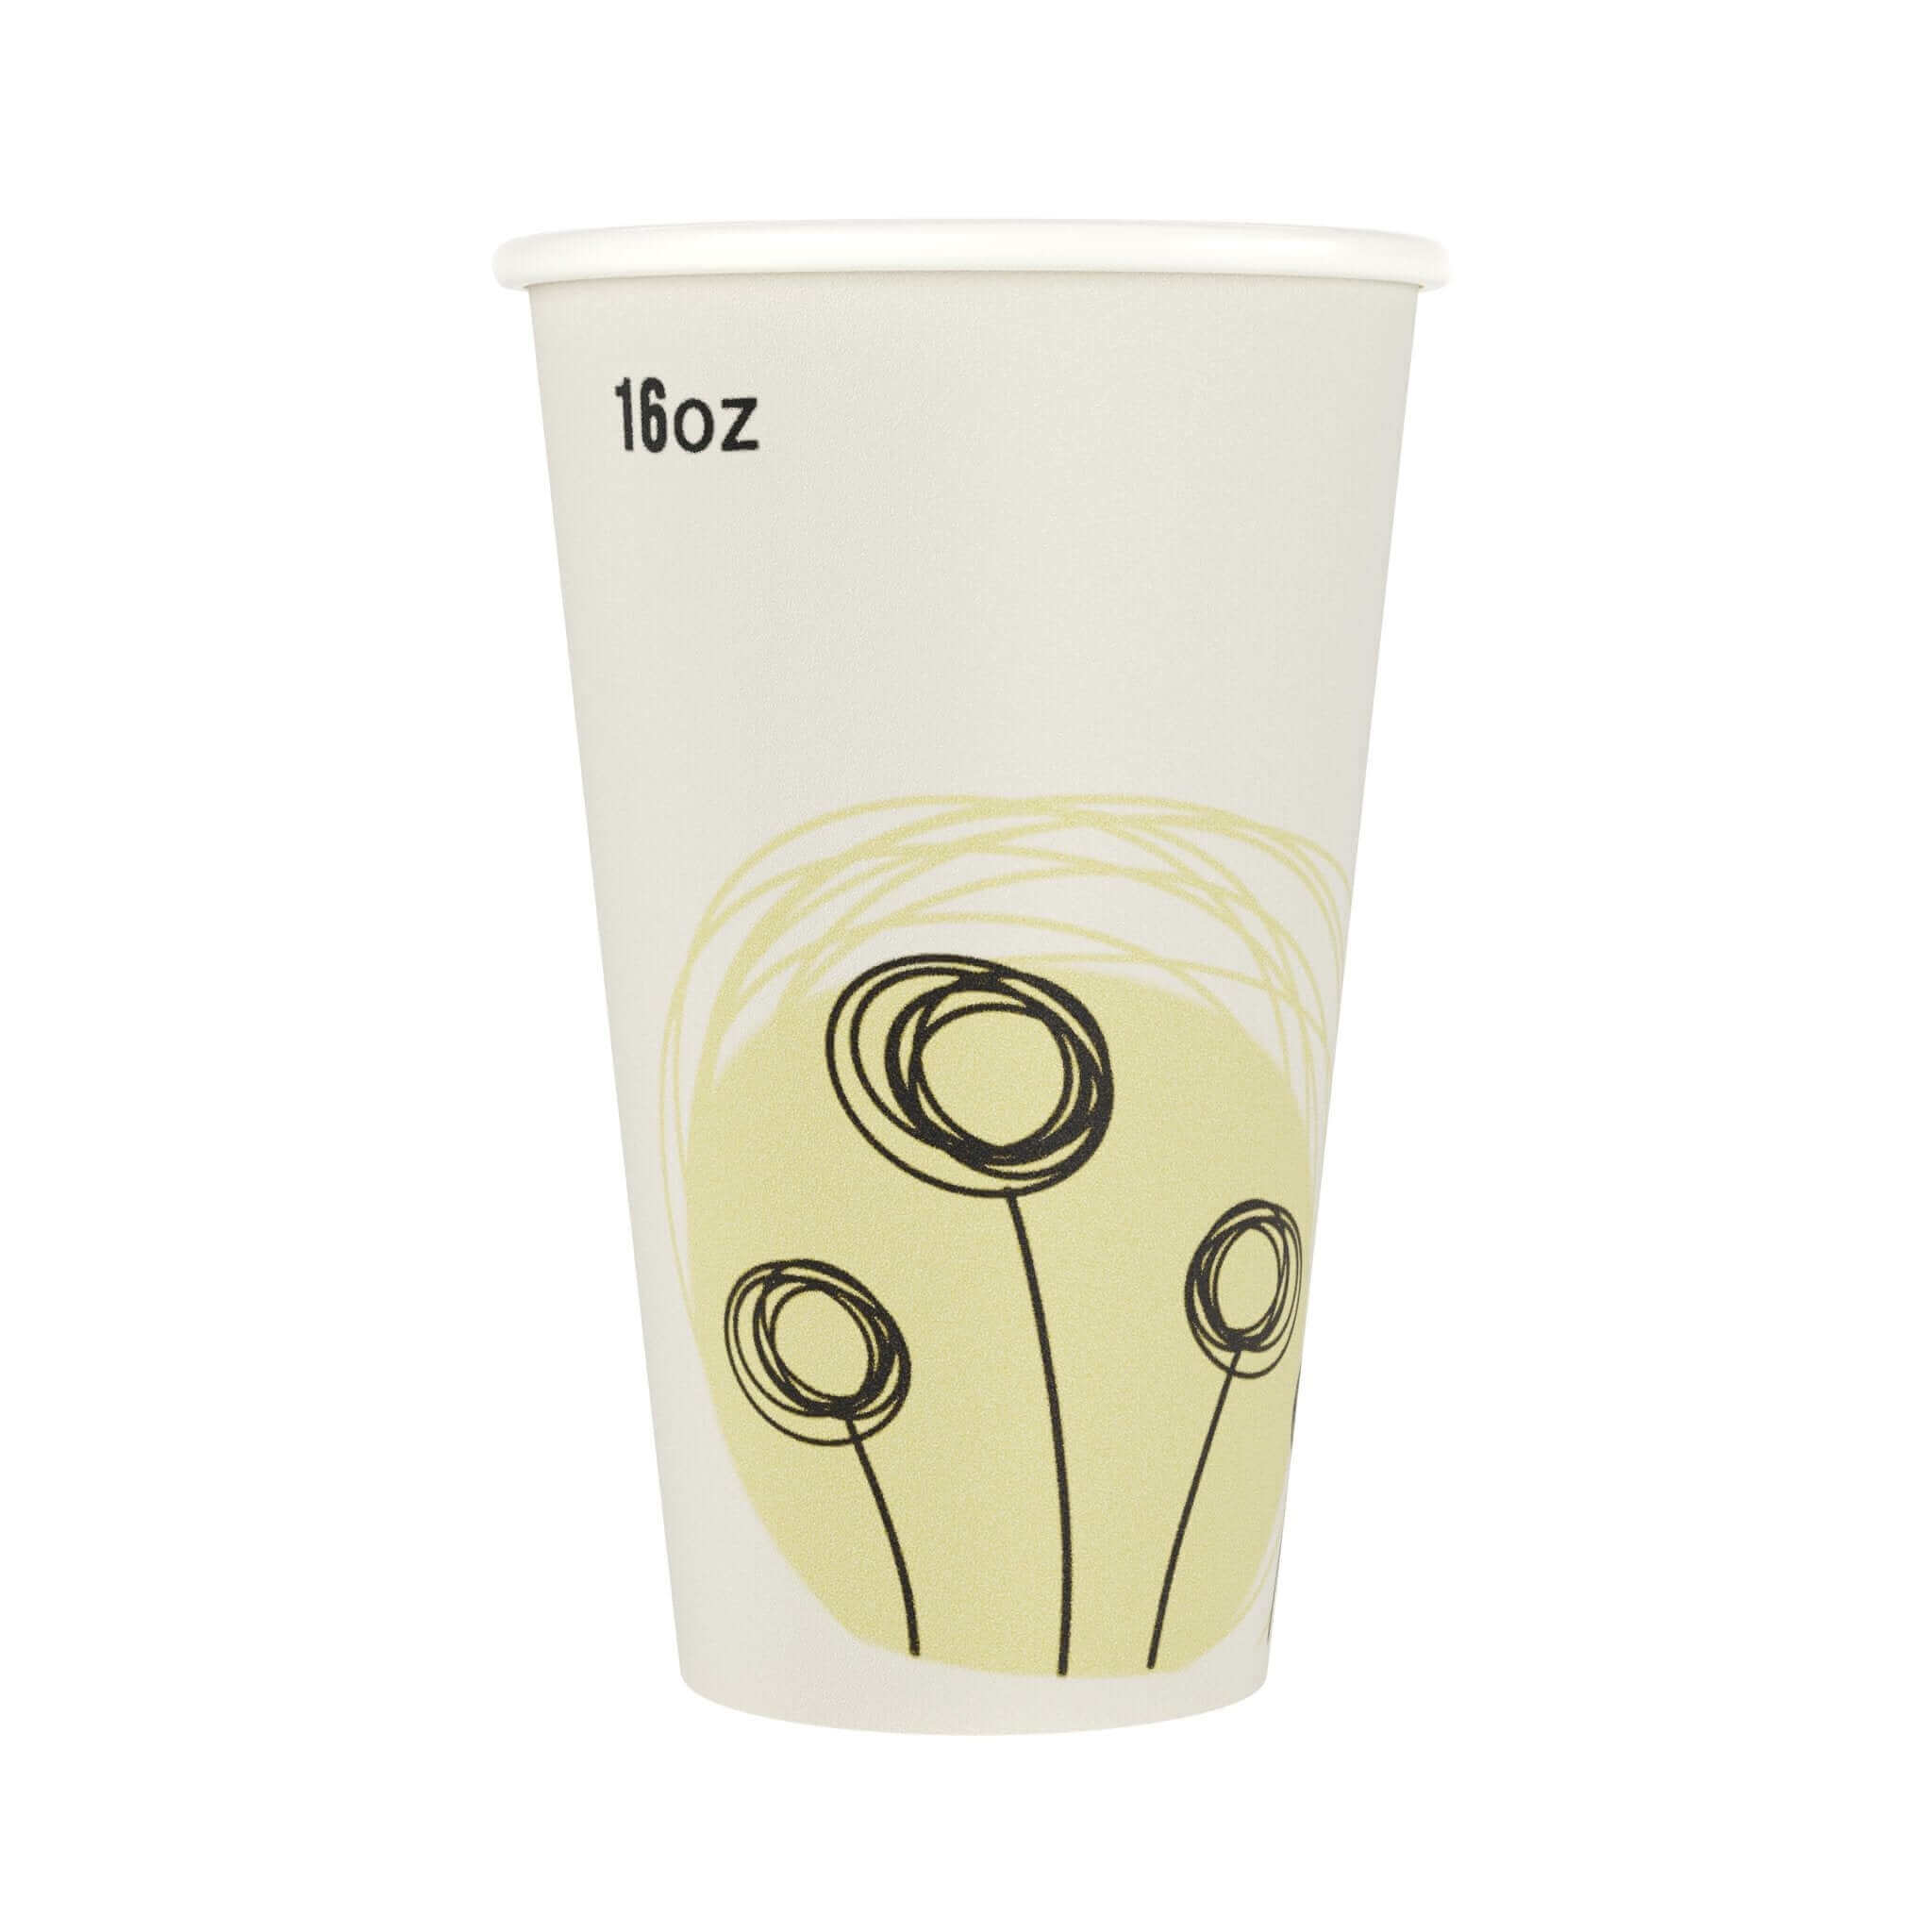 16 Oz Monogram Insulated Hot Cups | 1000 Count - Yom Tov Settings